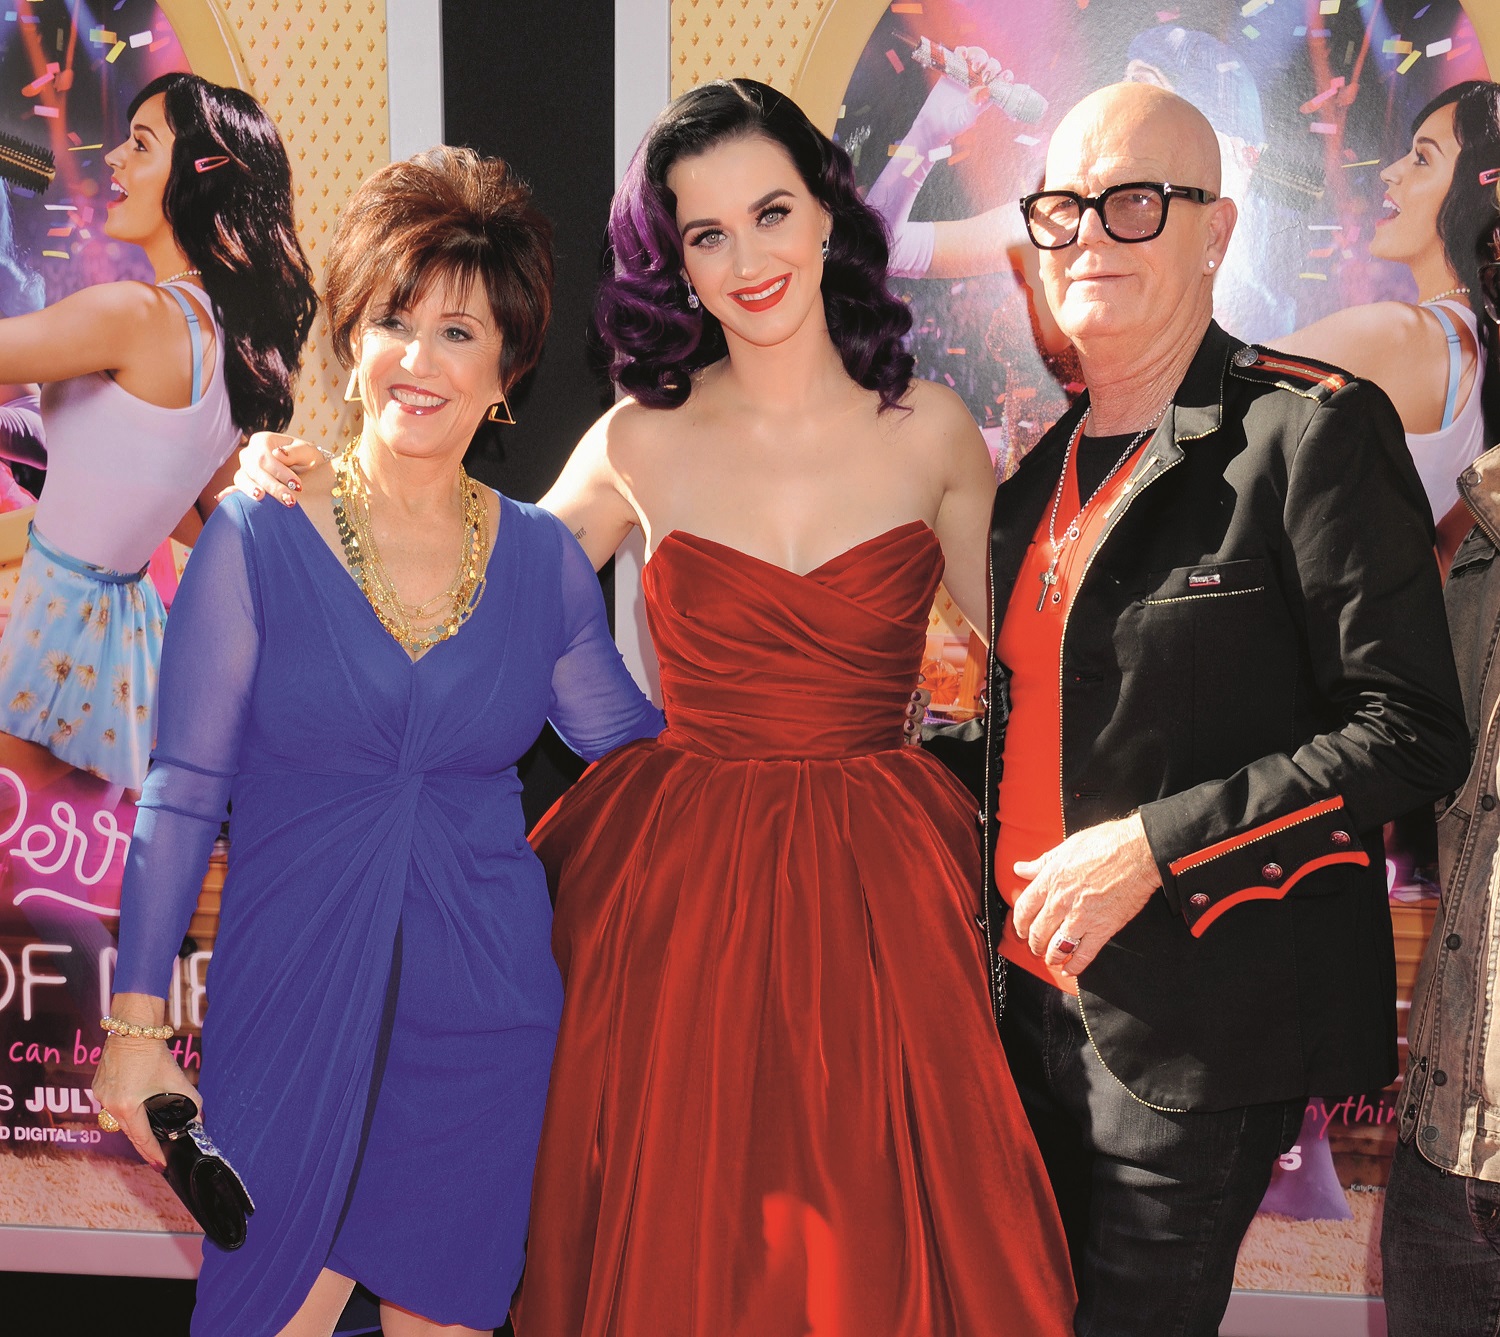 HOLLYWOOD, CA - JUNE 26: Singer Katy Perry (C) and mom Mary Perry Hudson and dad Keith Hudson arrive at 